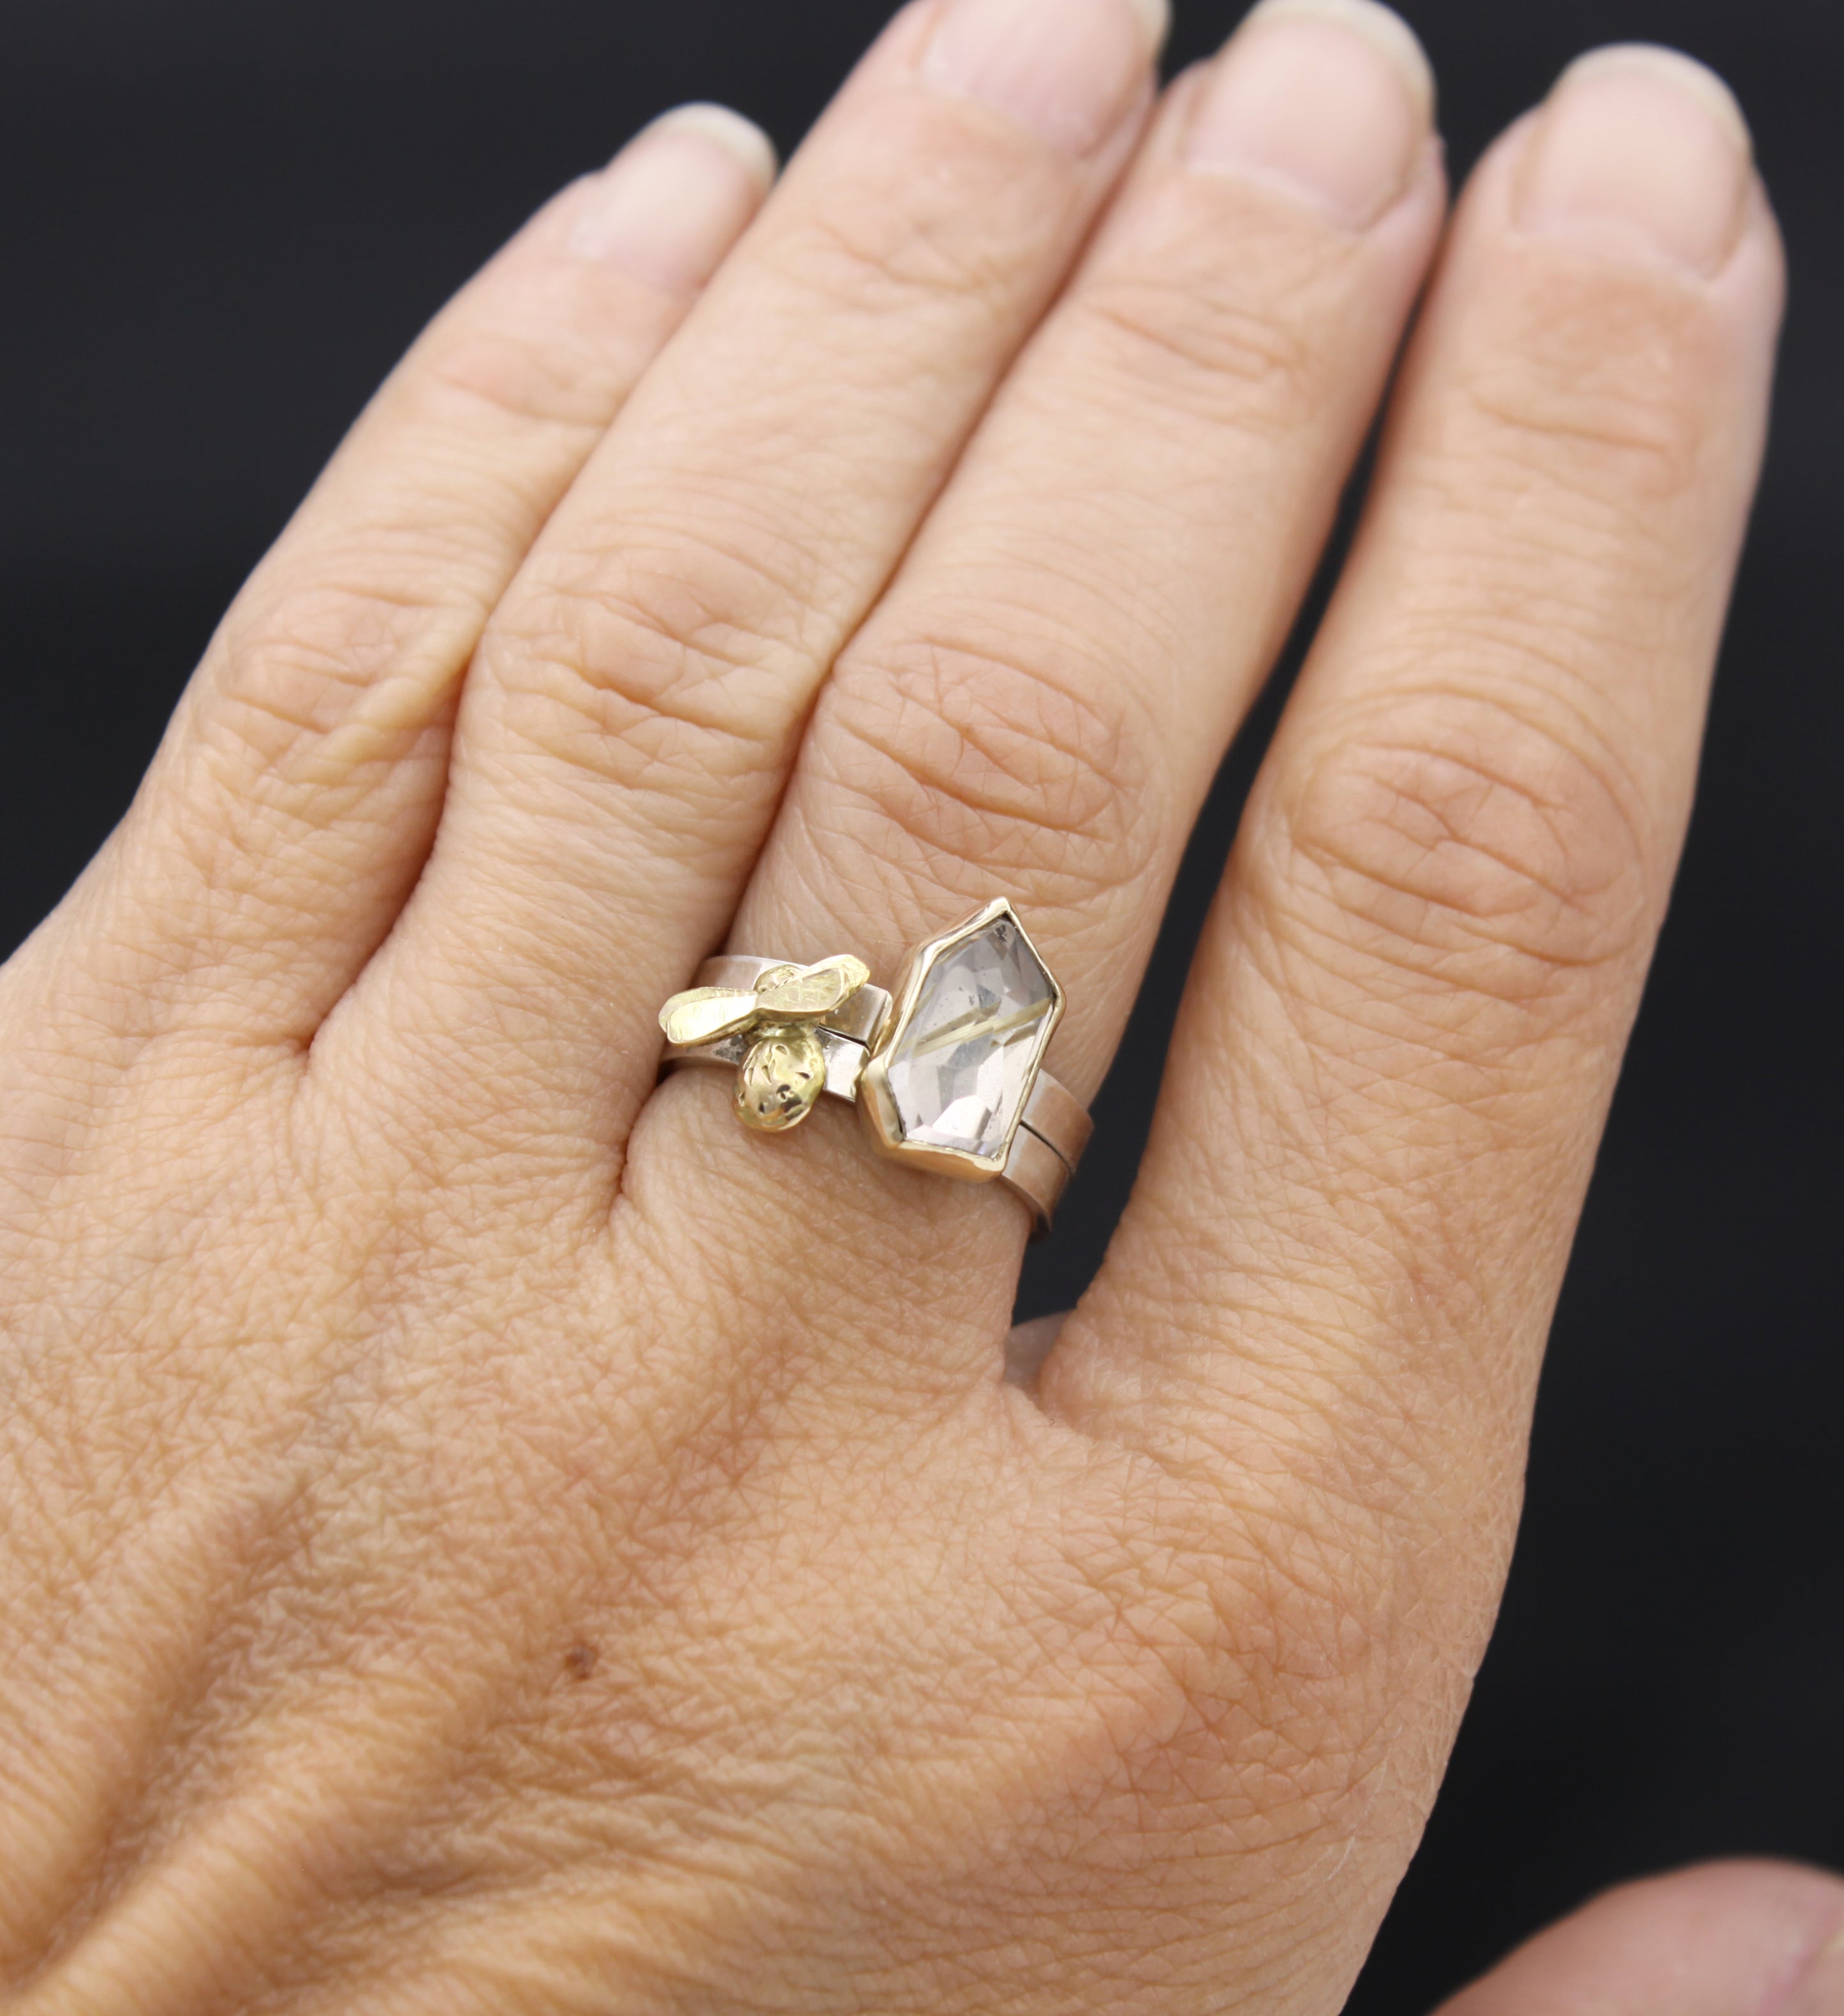 Honeybee and Honeycomb Stacking Ring Set, One of a Kind, 14K and Sterling